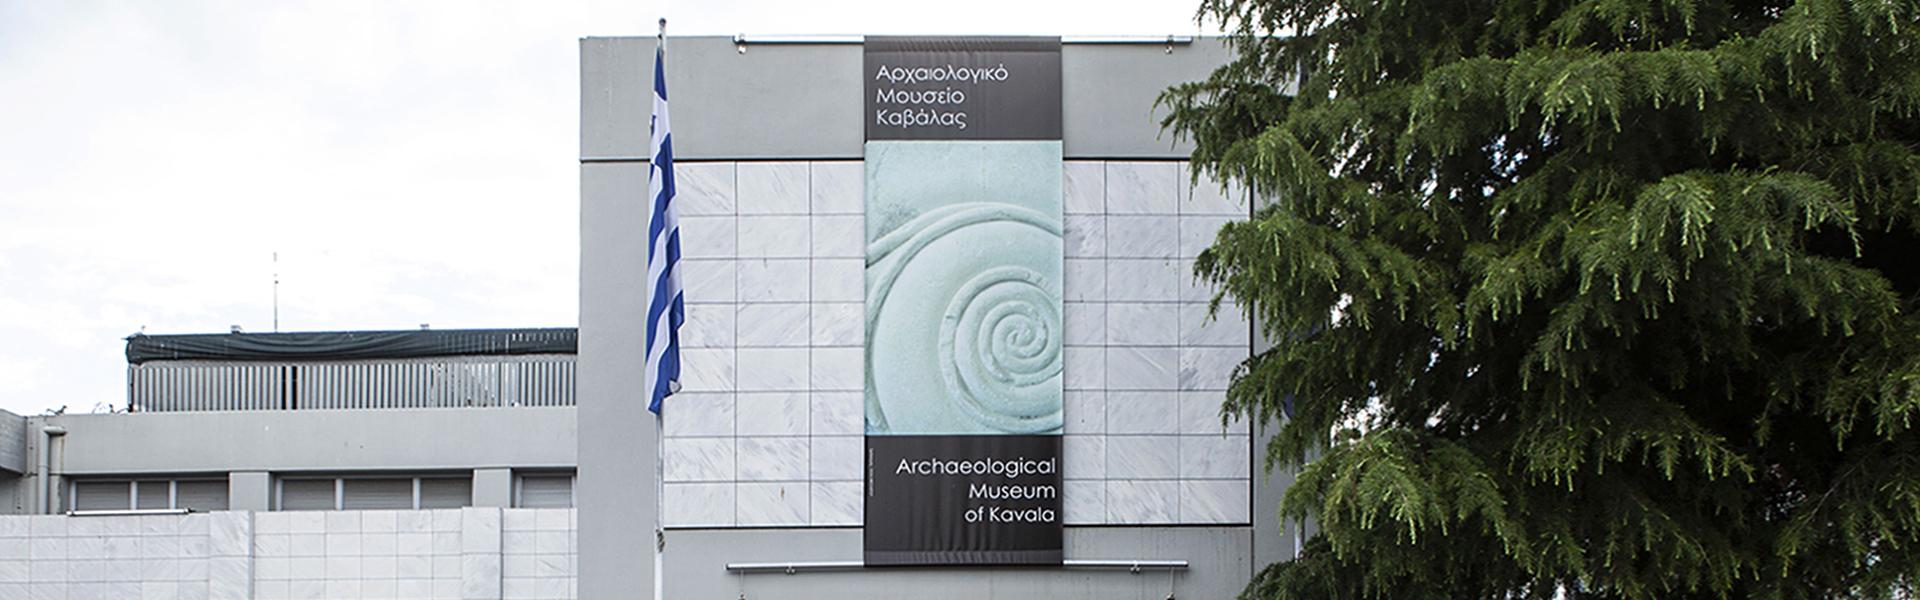 Archaeological Museum of Kavala 